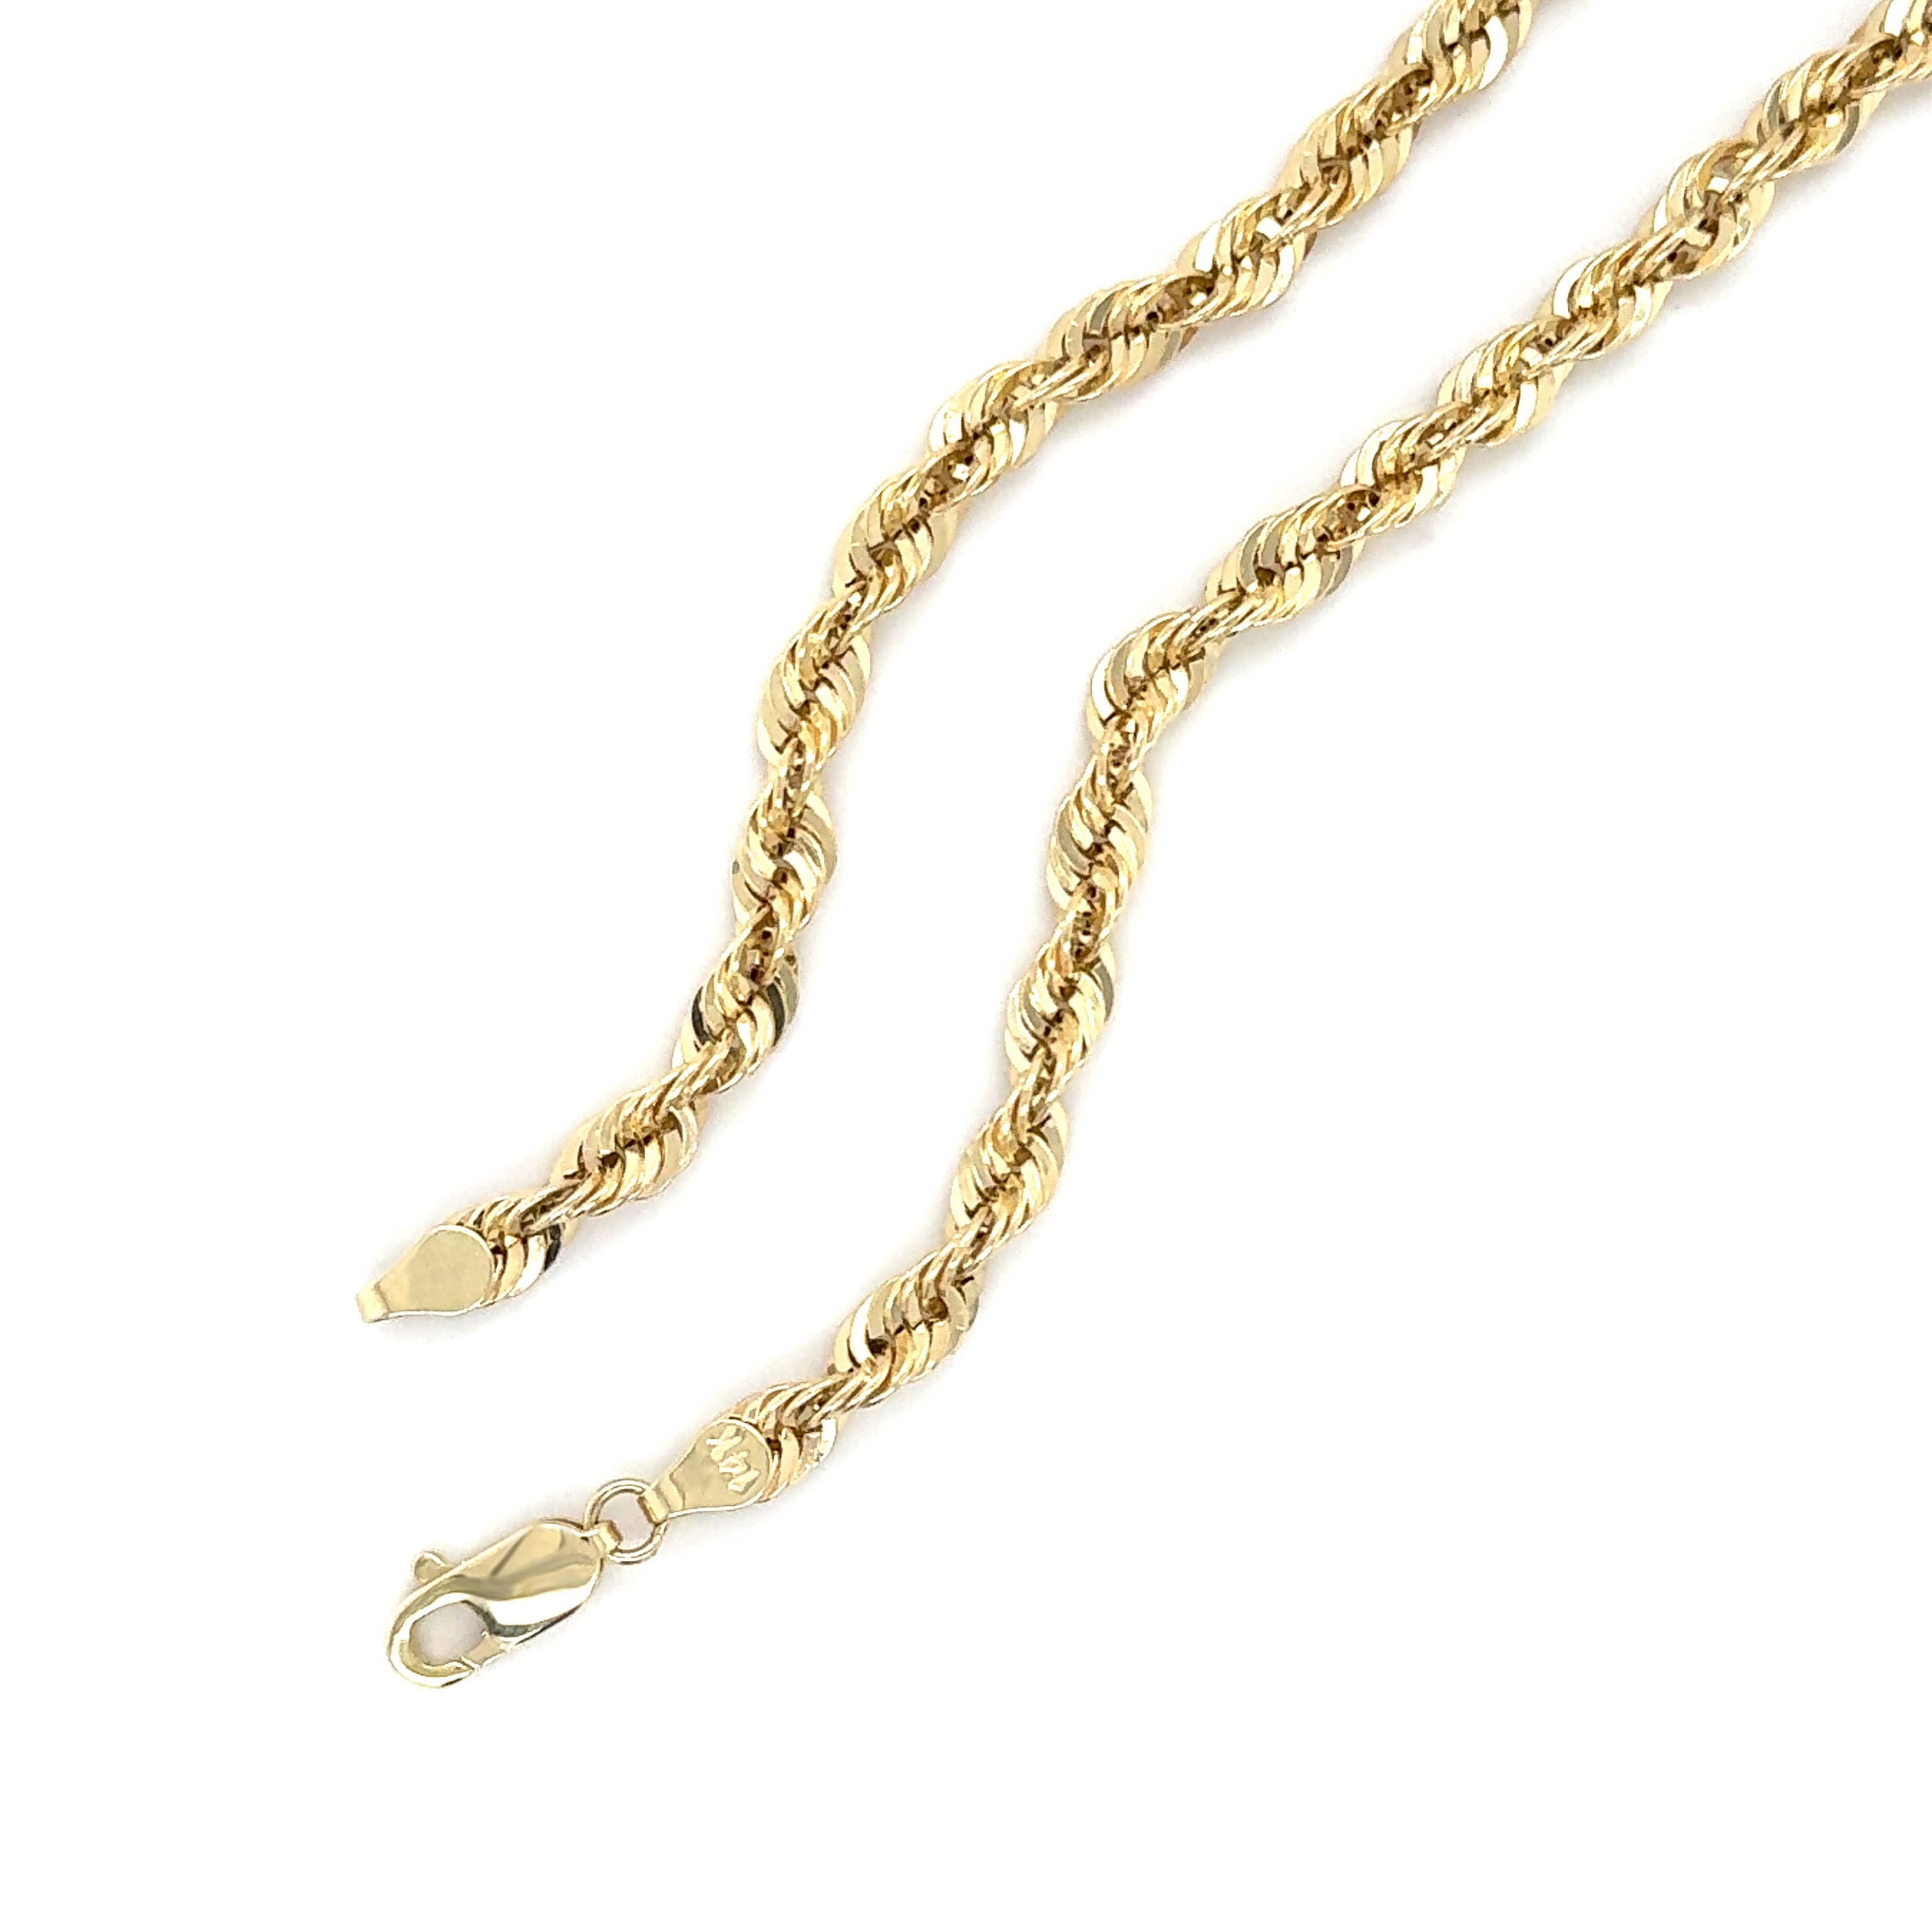 14K YELLOW GOLD THICK ROPE CHAIN NECKLACE WOMEN